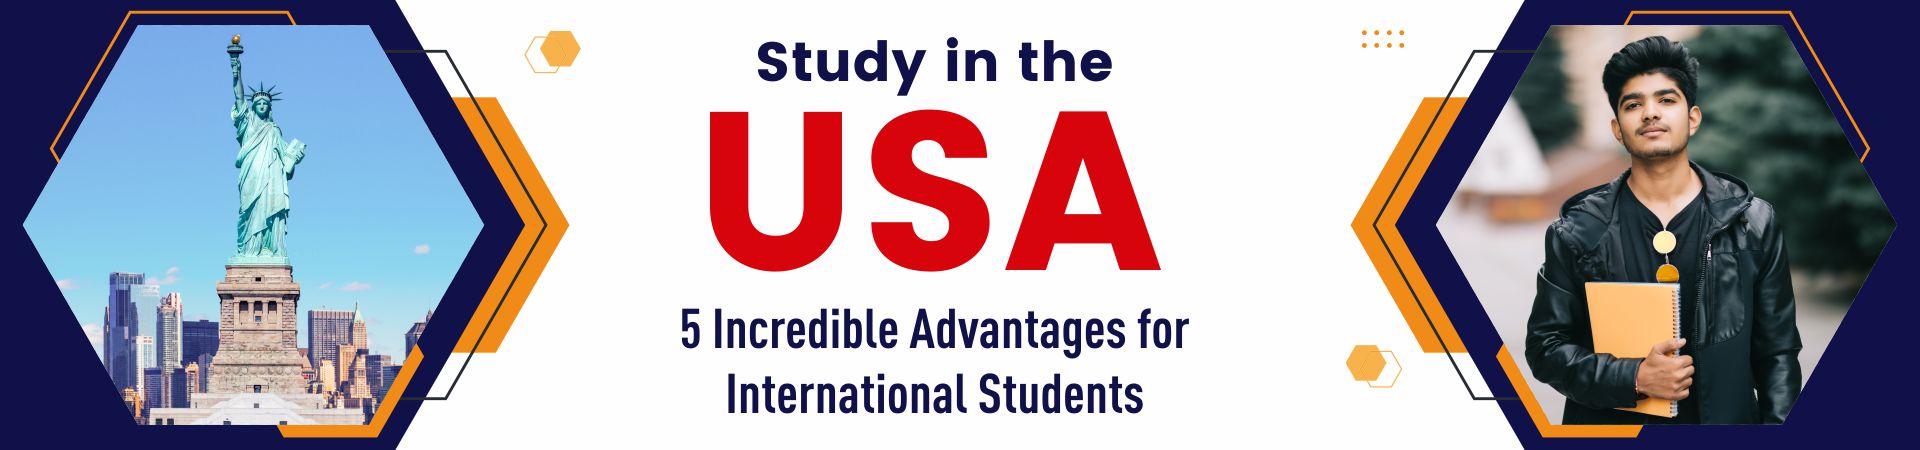 Study in the USA: 5 Incredible Advantages for International Students